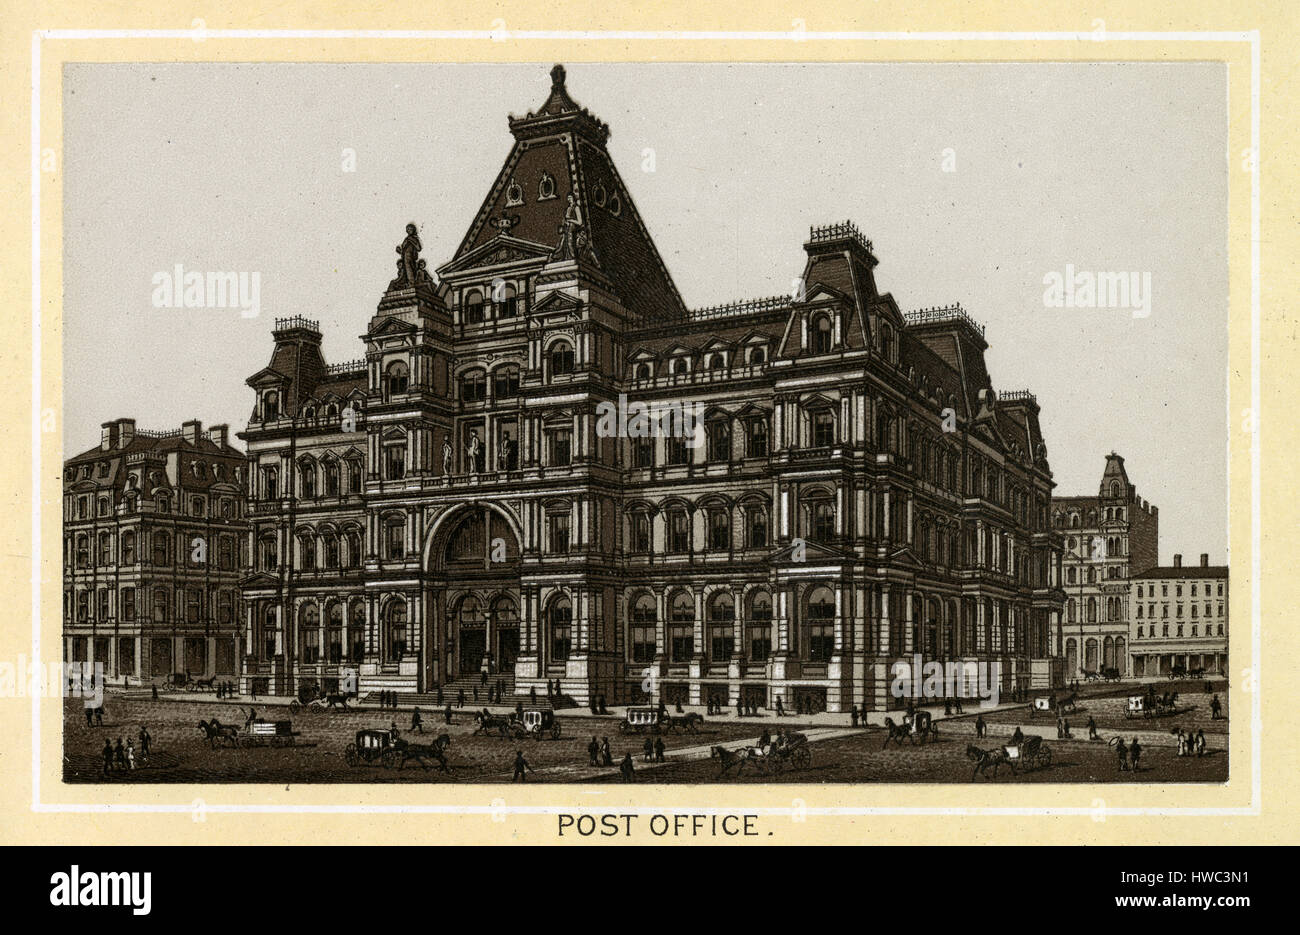 Antique 1883 monochromatic print from a souvenir album, showing the United States Post Office in Boston, Massachusetts. The United States Post Office and Sub-Treasury Building (demolished 1929) was a public building on Post Office Square. Printed with the Glaser/Frey lithographic process, a multi-stone lithographic process developed in Germany. Stock Photo